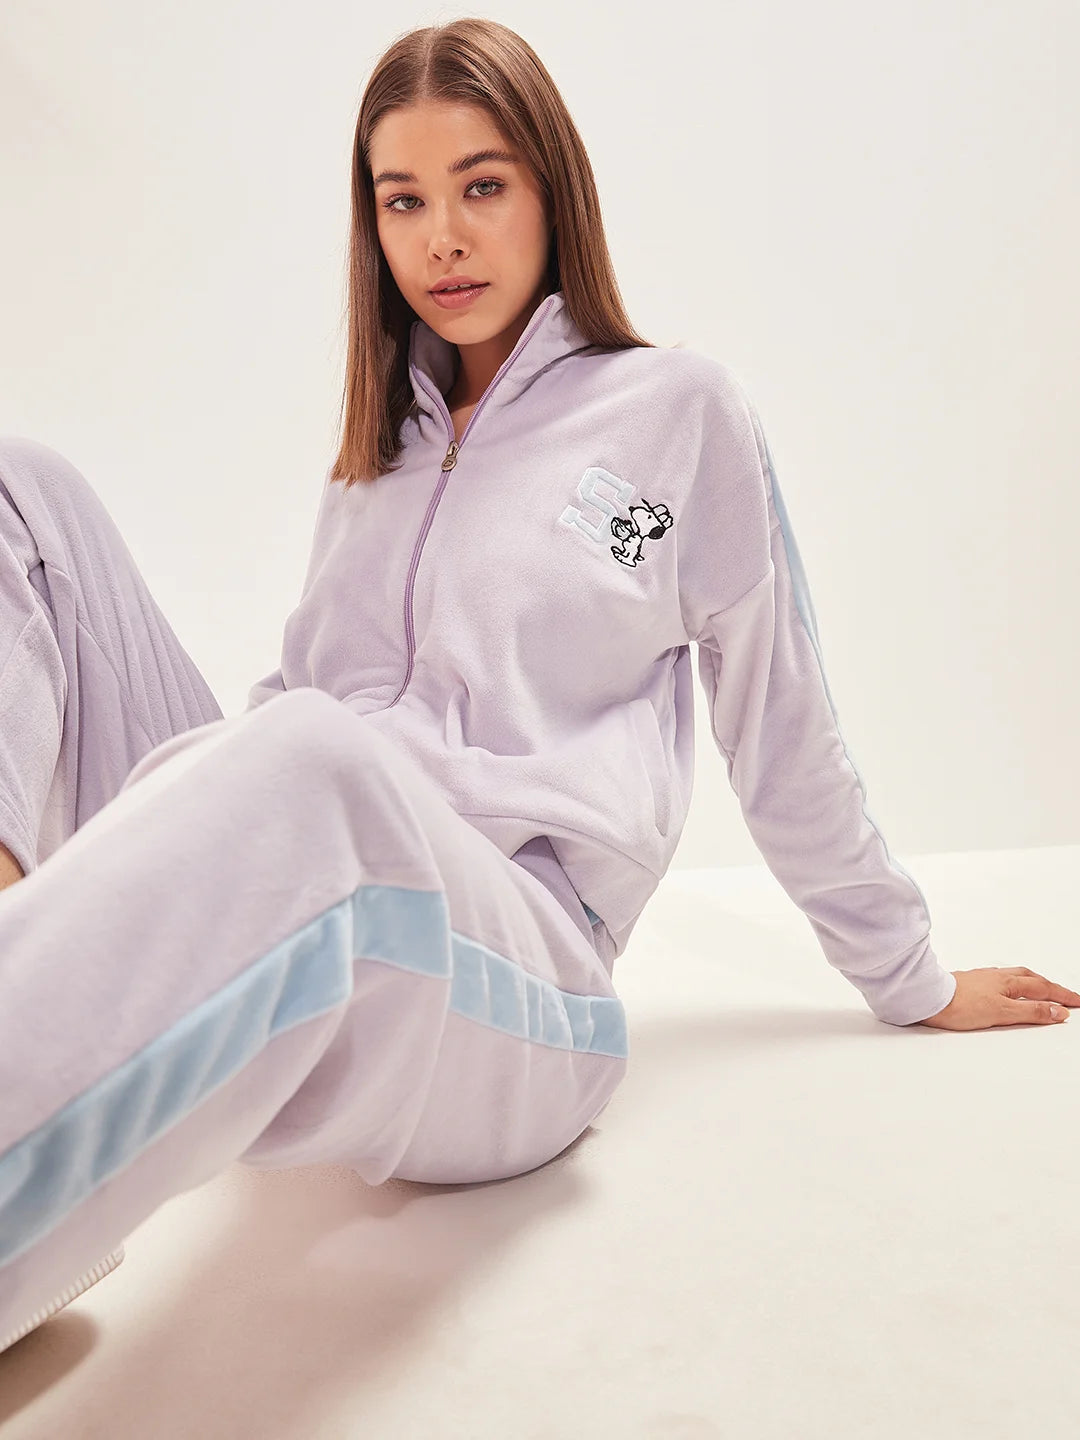 Women Track Suit D.No.06 in Surat at best price by Aarush Textile - Justdial